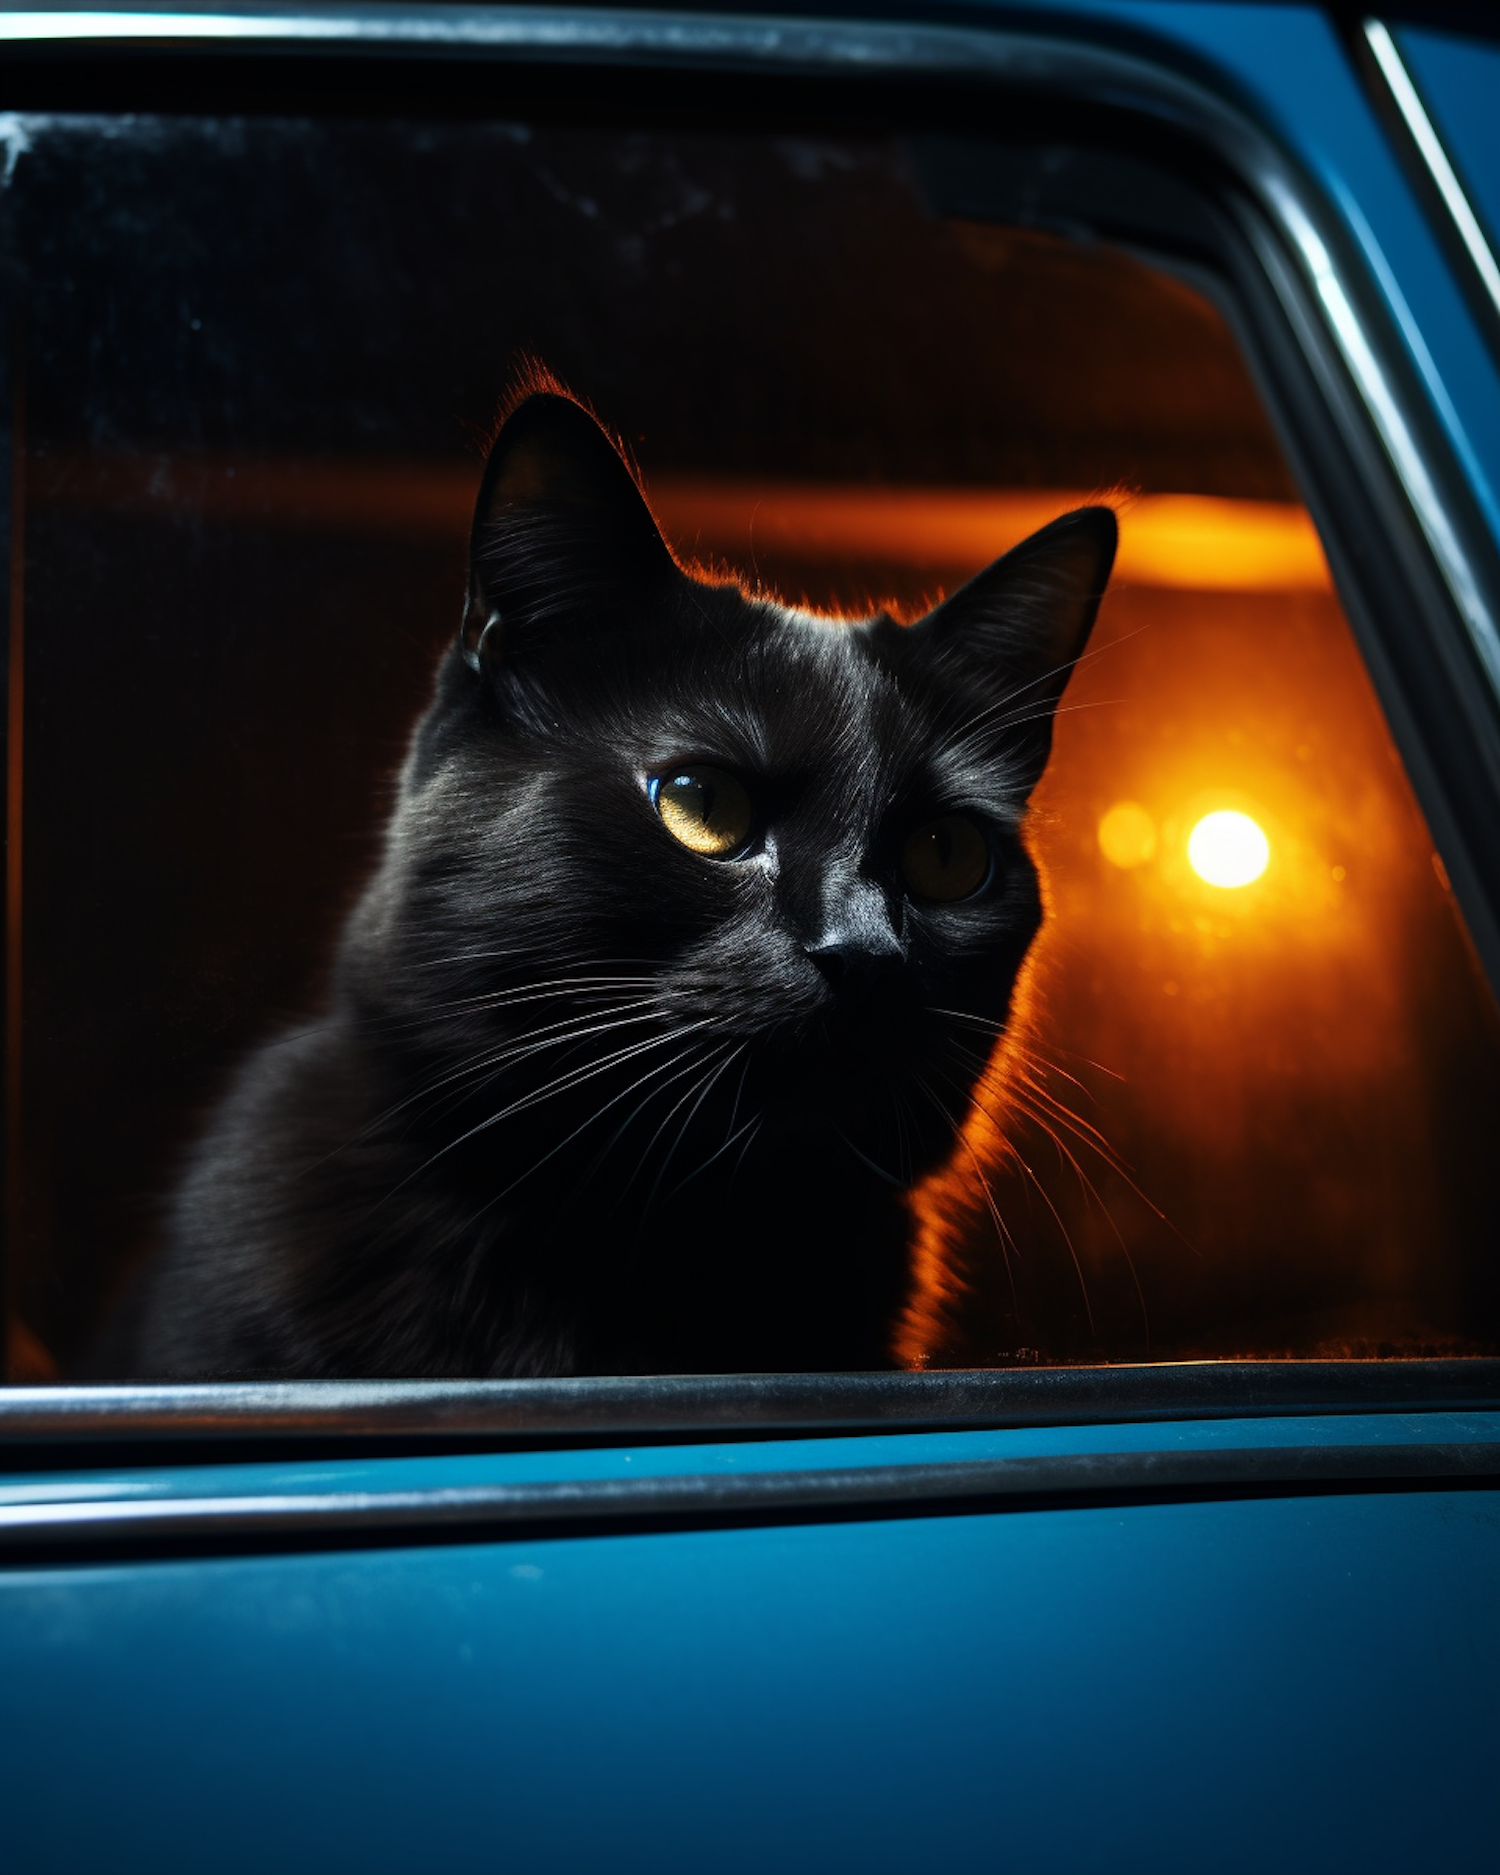 Mystic Glow: The Enigmatic Black Cat in a Blue Vehicle